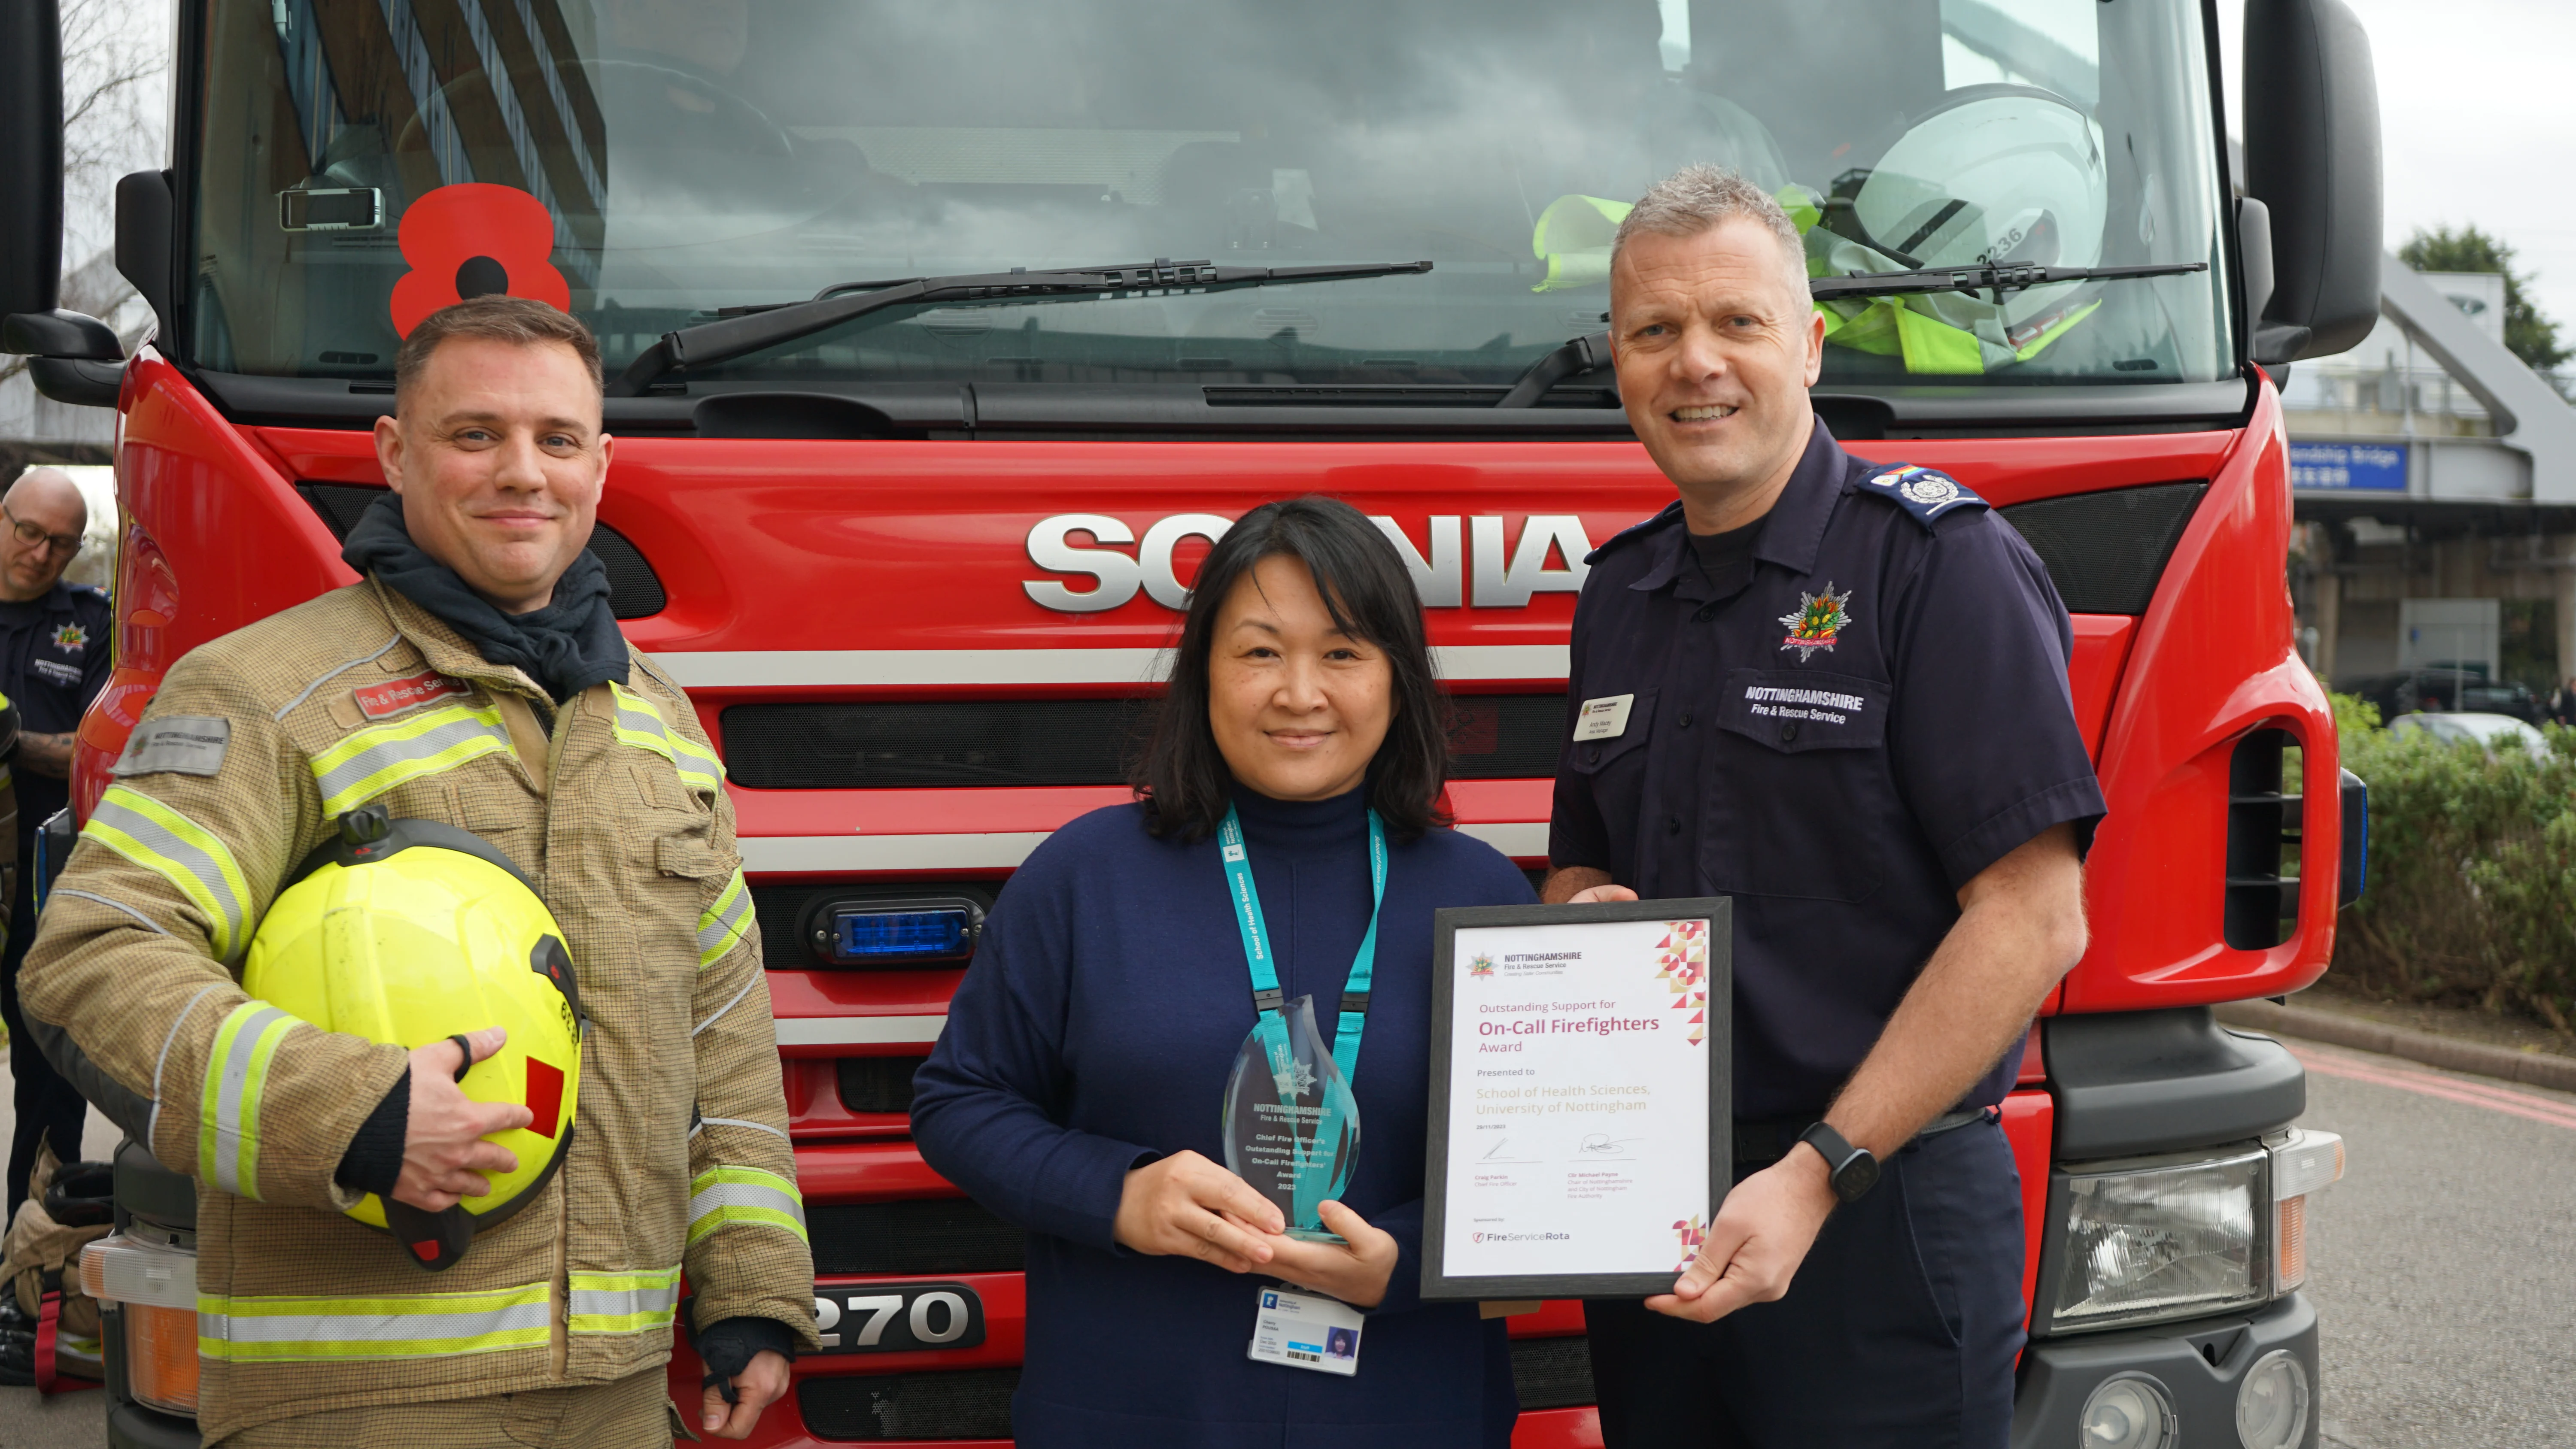 Aaron, Cherry and Andy smile in front of the fire engine as the award is presented.